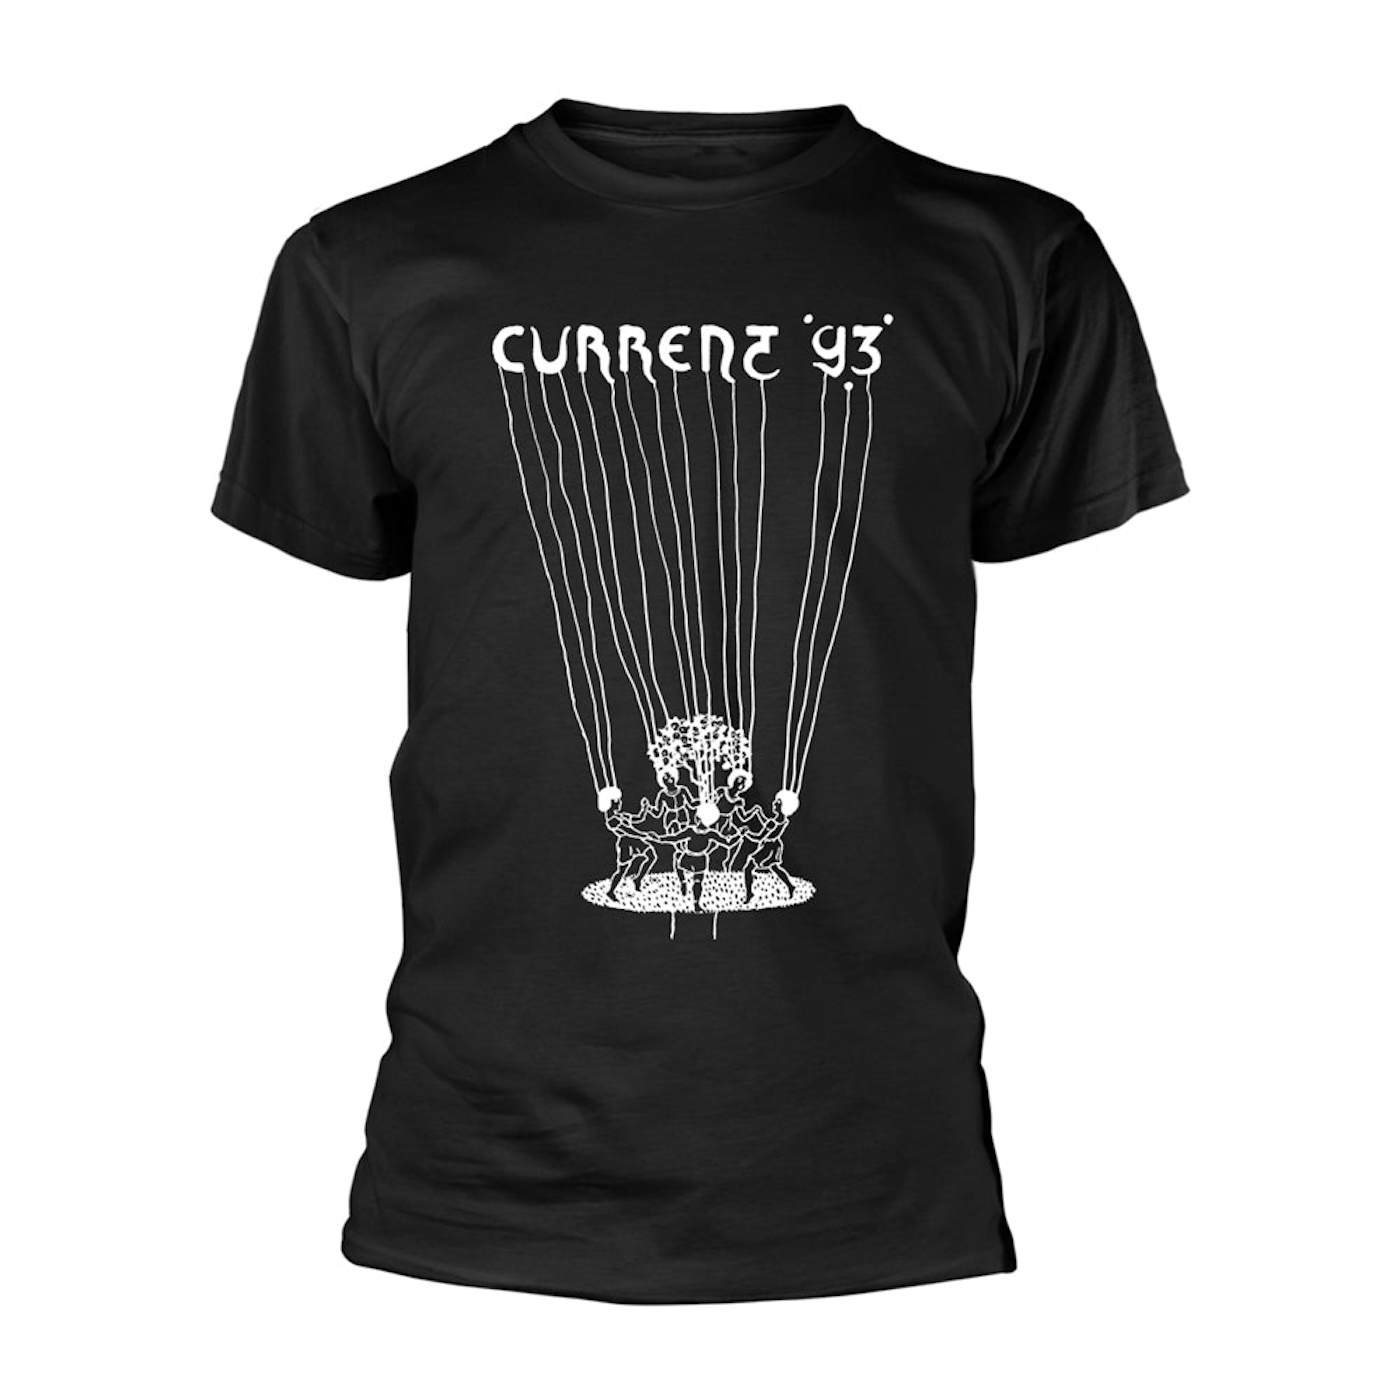 Current 93 T Shirt - Mayqueen As Mayking